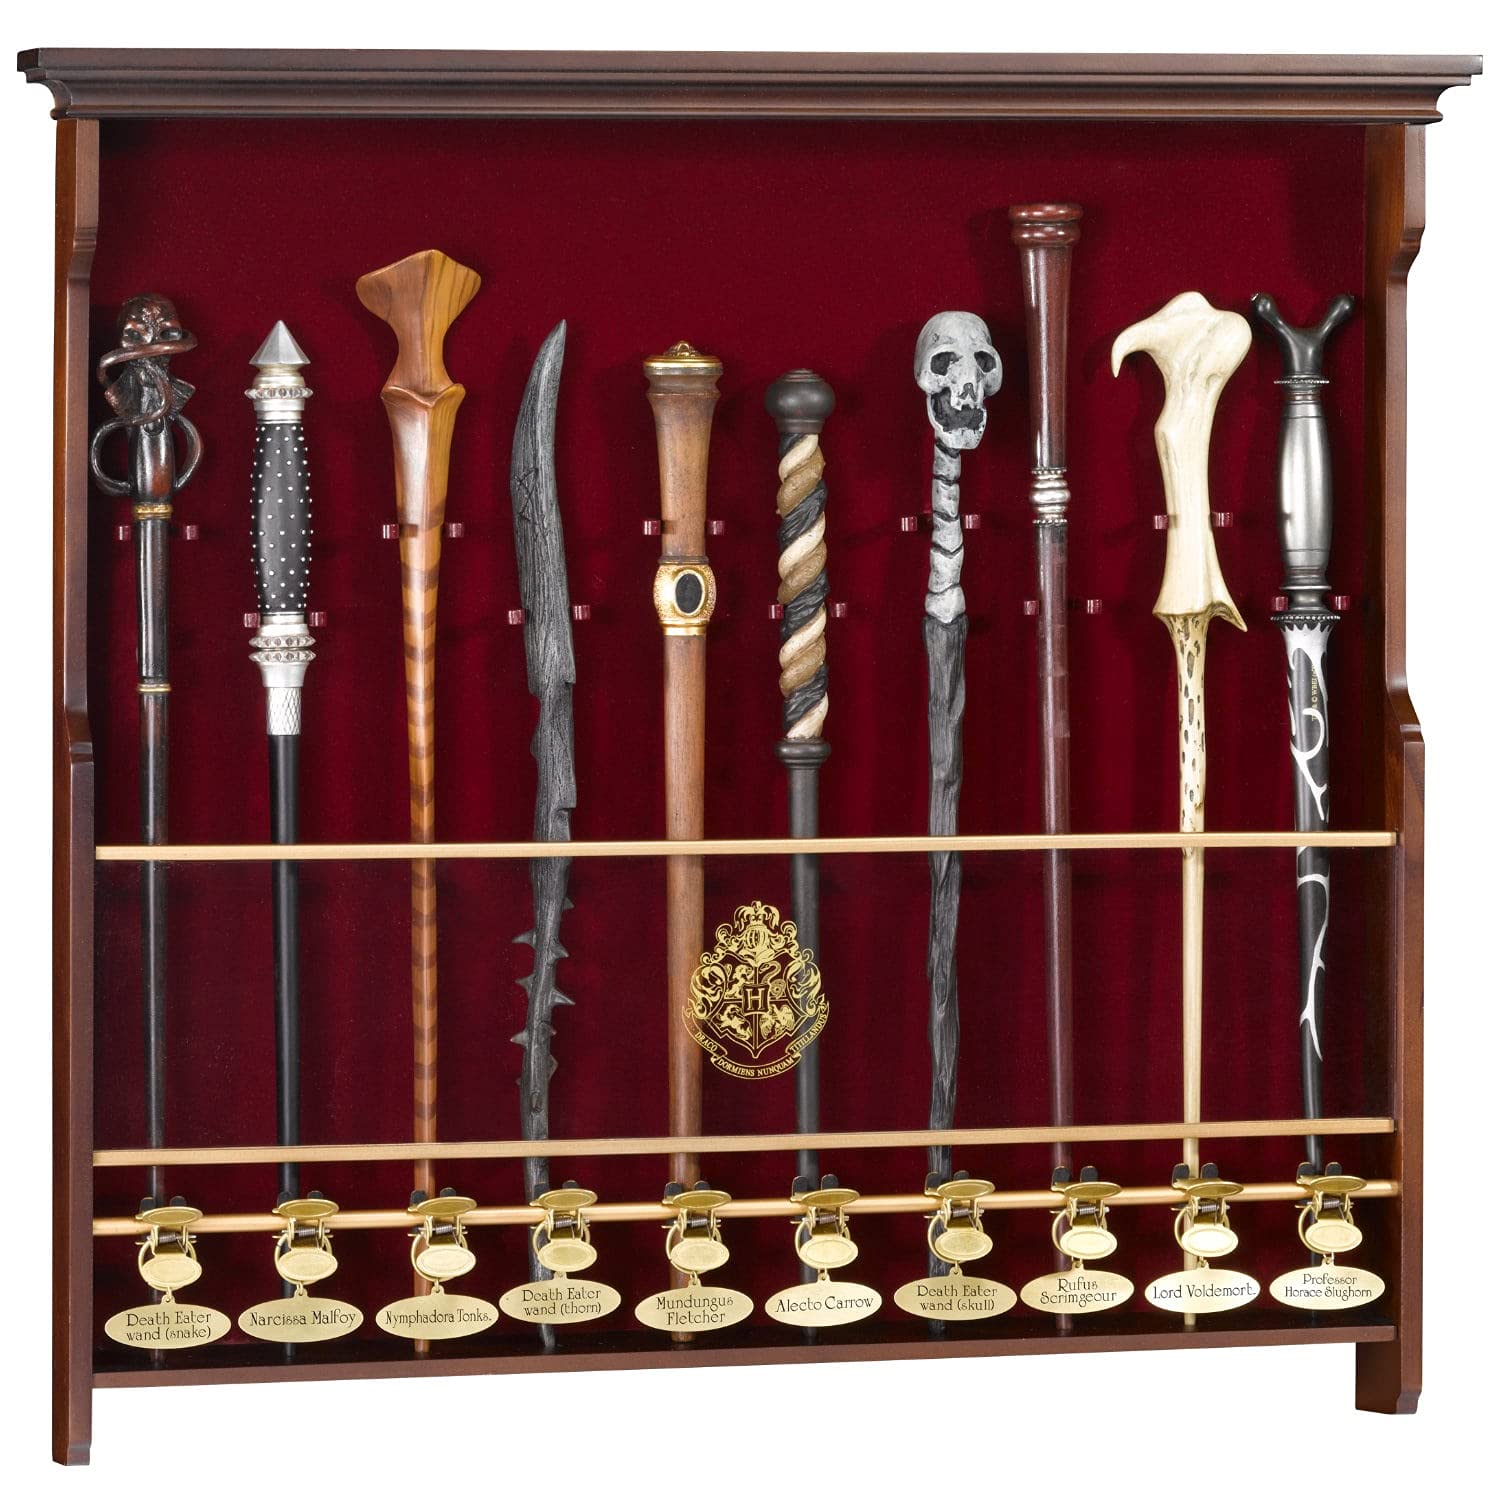 The Noble Collection Harry Potter 10 Wand Display - Wooden Display Case for 10 Wands (Not Included) - Officially Licensed Film Set Movie Props Gifts Merchandise